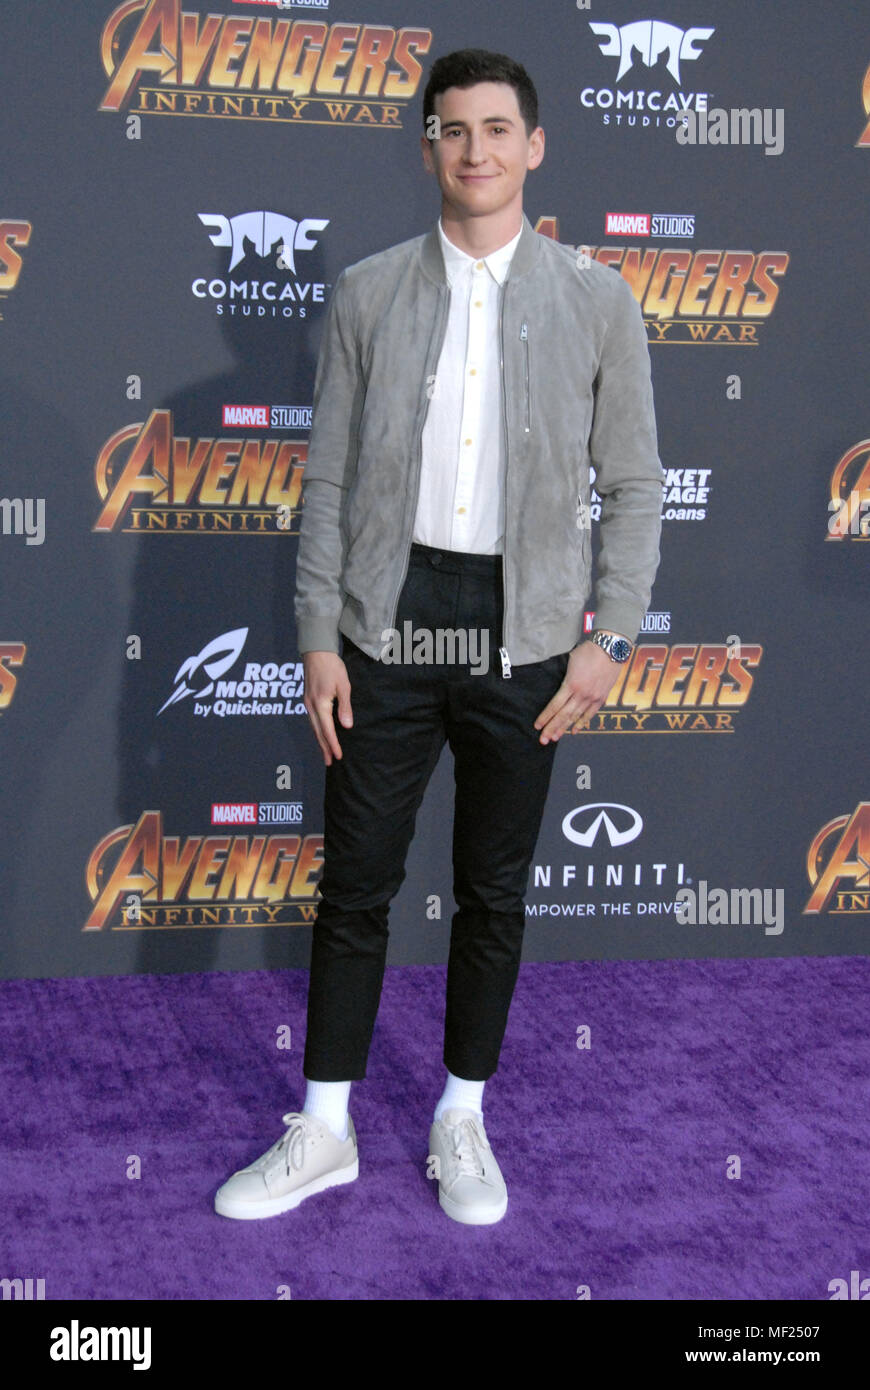 Los Angeles, California, USA. 23rd April, 2018. Actor Sam Lerner attends the World Premiere of Disney and Marvels 'Avengers: Infinity War' on April 23, 2018 in Los Angeles, California. Photo by Barry King/Alamy Live News Stock Photo